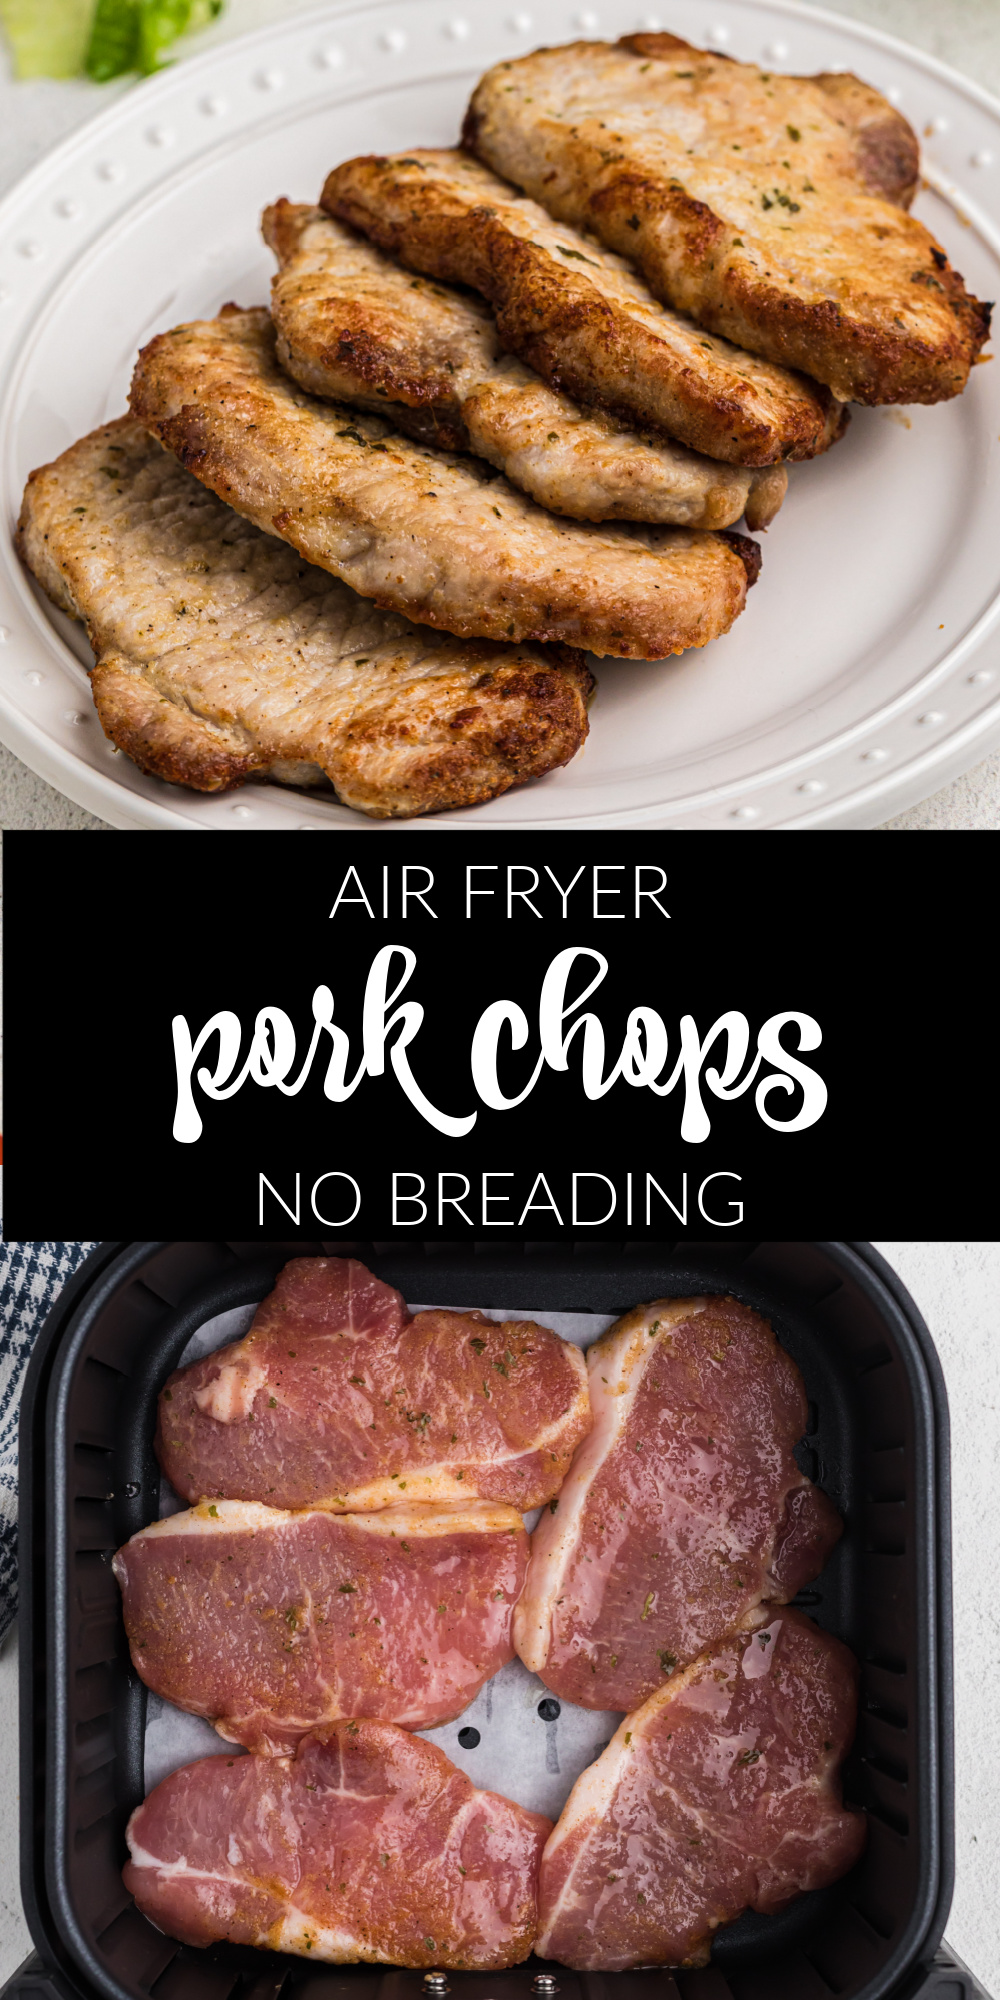 Are you looking for a fast and easy dinner recipe with less fat? Fall in love with these simple Air Fryer Pork Chops No Breading! It's the perfect low carb dish that can be customized with your favorite seasonings to fit your tastes!